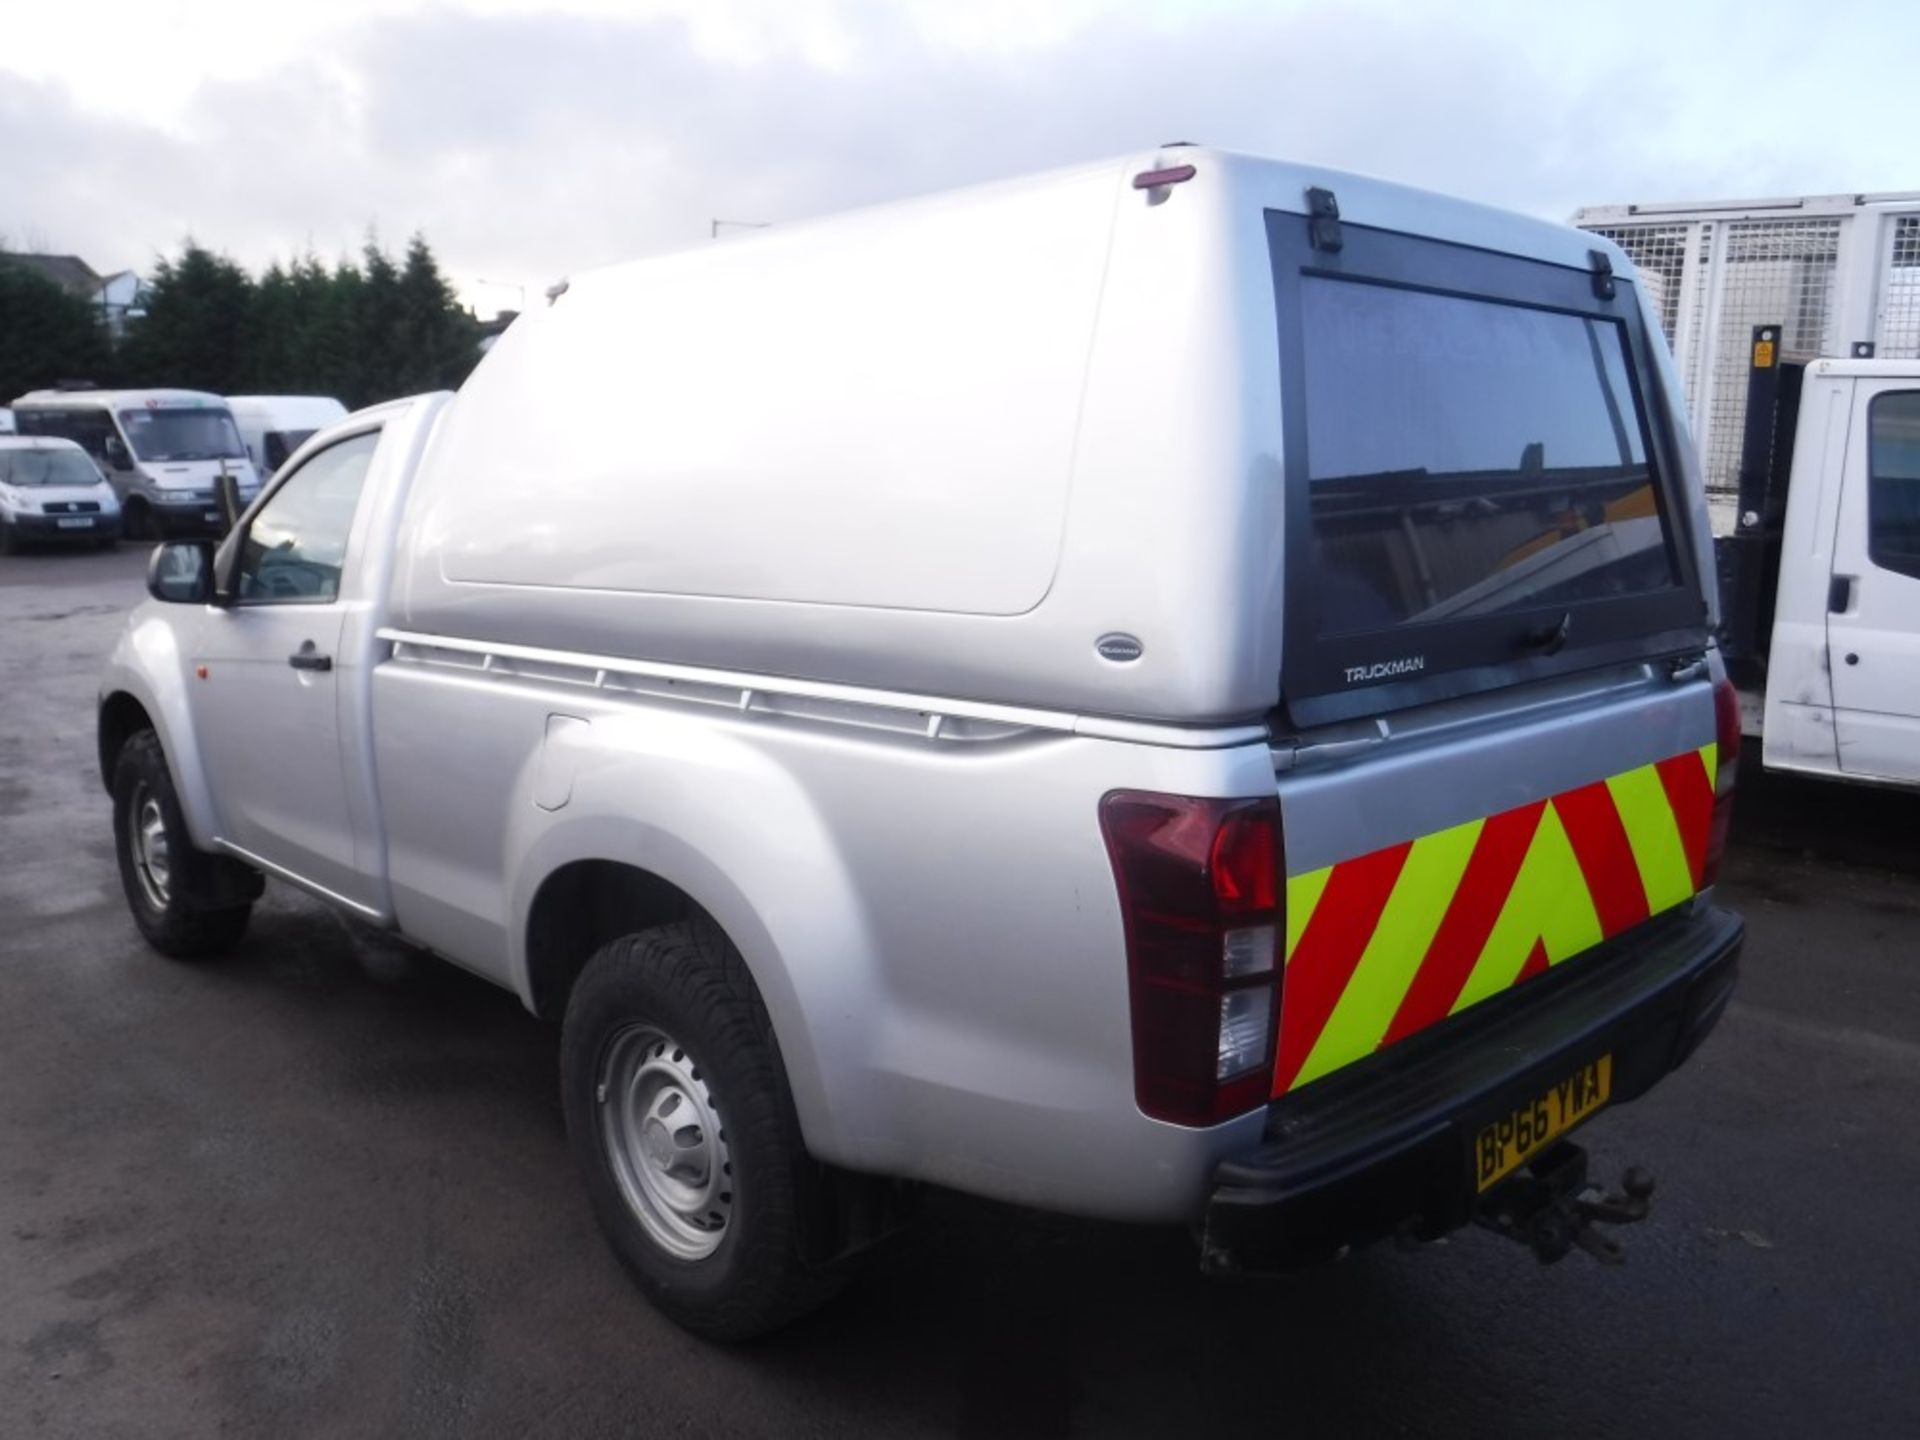 66 reg ISUZU D-MAX S/C TD PICKUP, 1ST REG 12/16, 84003M WARRANTED, V5 HERE, 1 OWNER FROM NEW [+ - Image 3 of 5